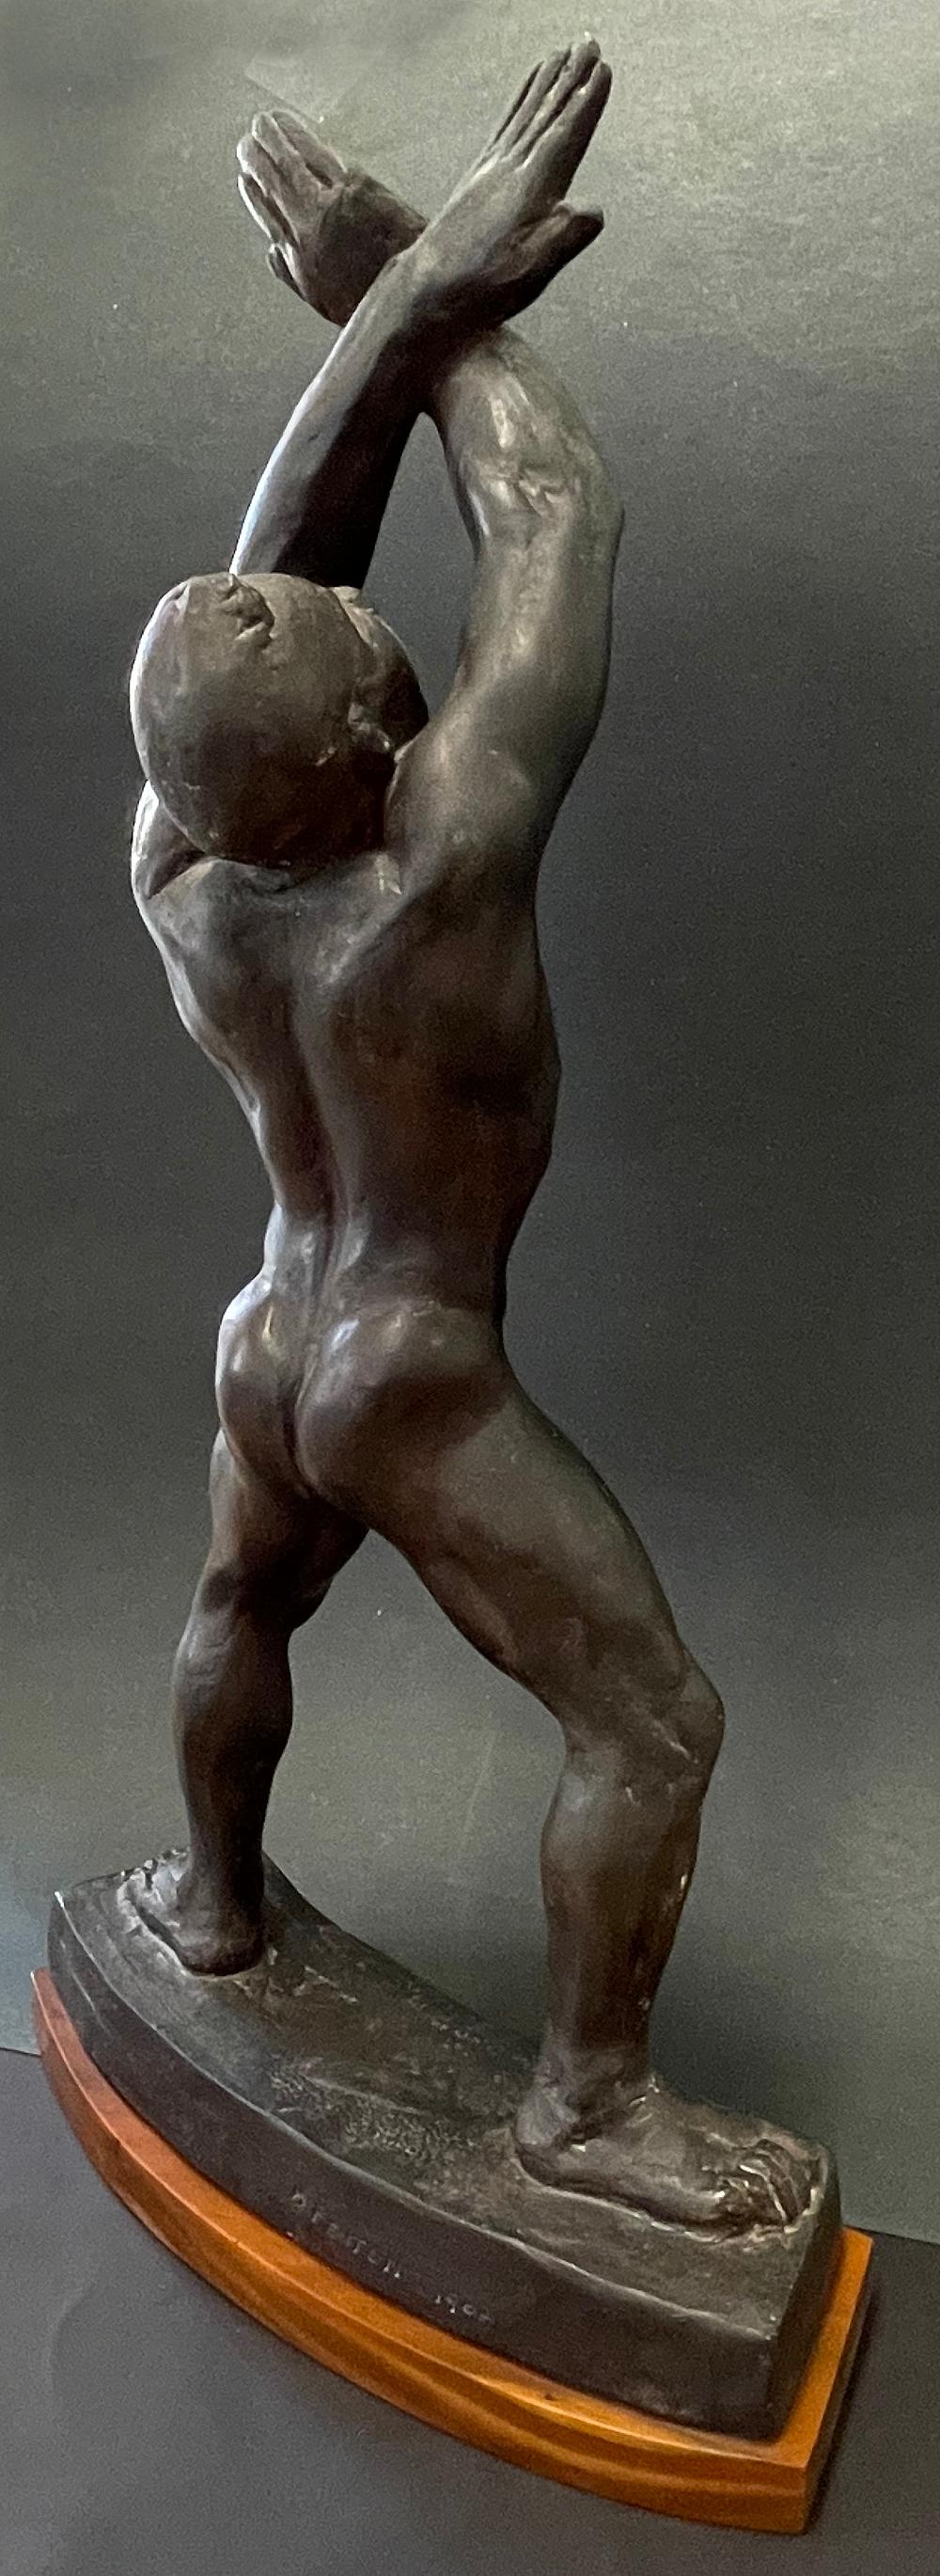 Highly unusual in Beatrice Fenton's oeuvre, this dramatic figure of a Black male figure with his arms raised and crossed at the wrist -- either in celebration, worship, agony or adoration, it's not clear -- may depict an African or an African